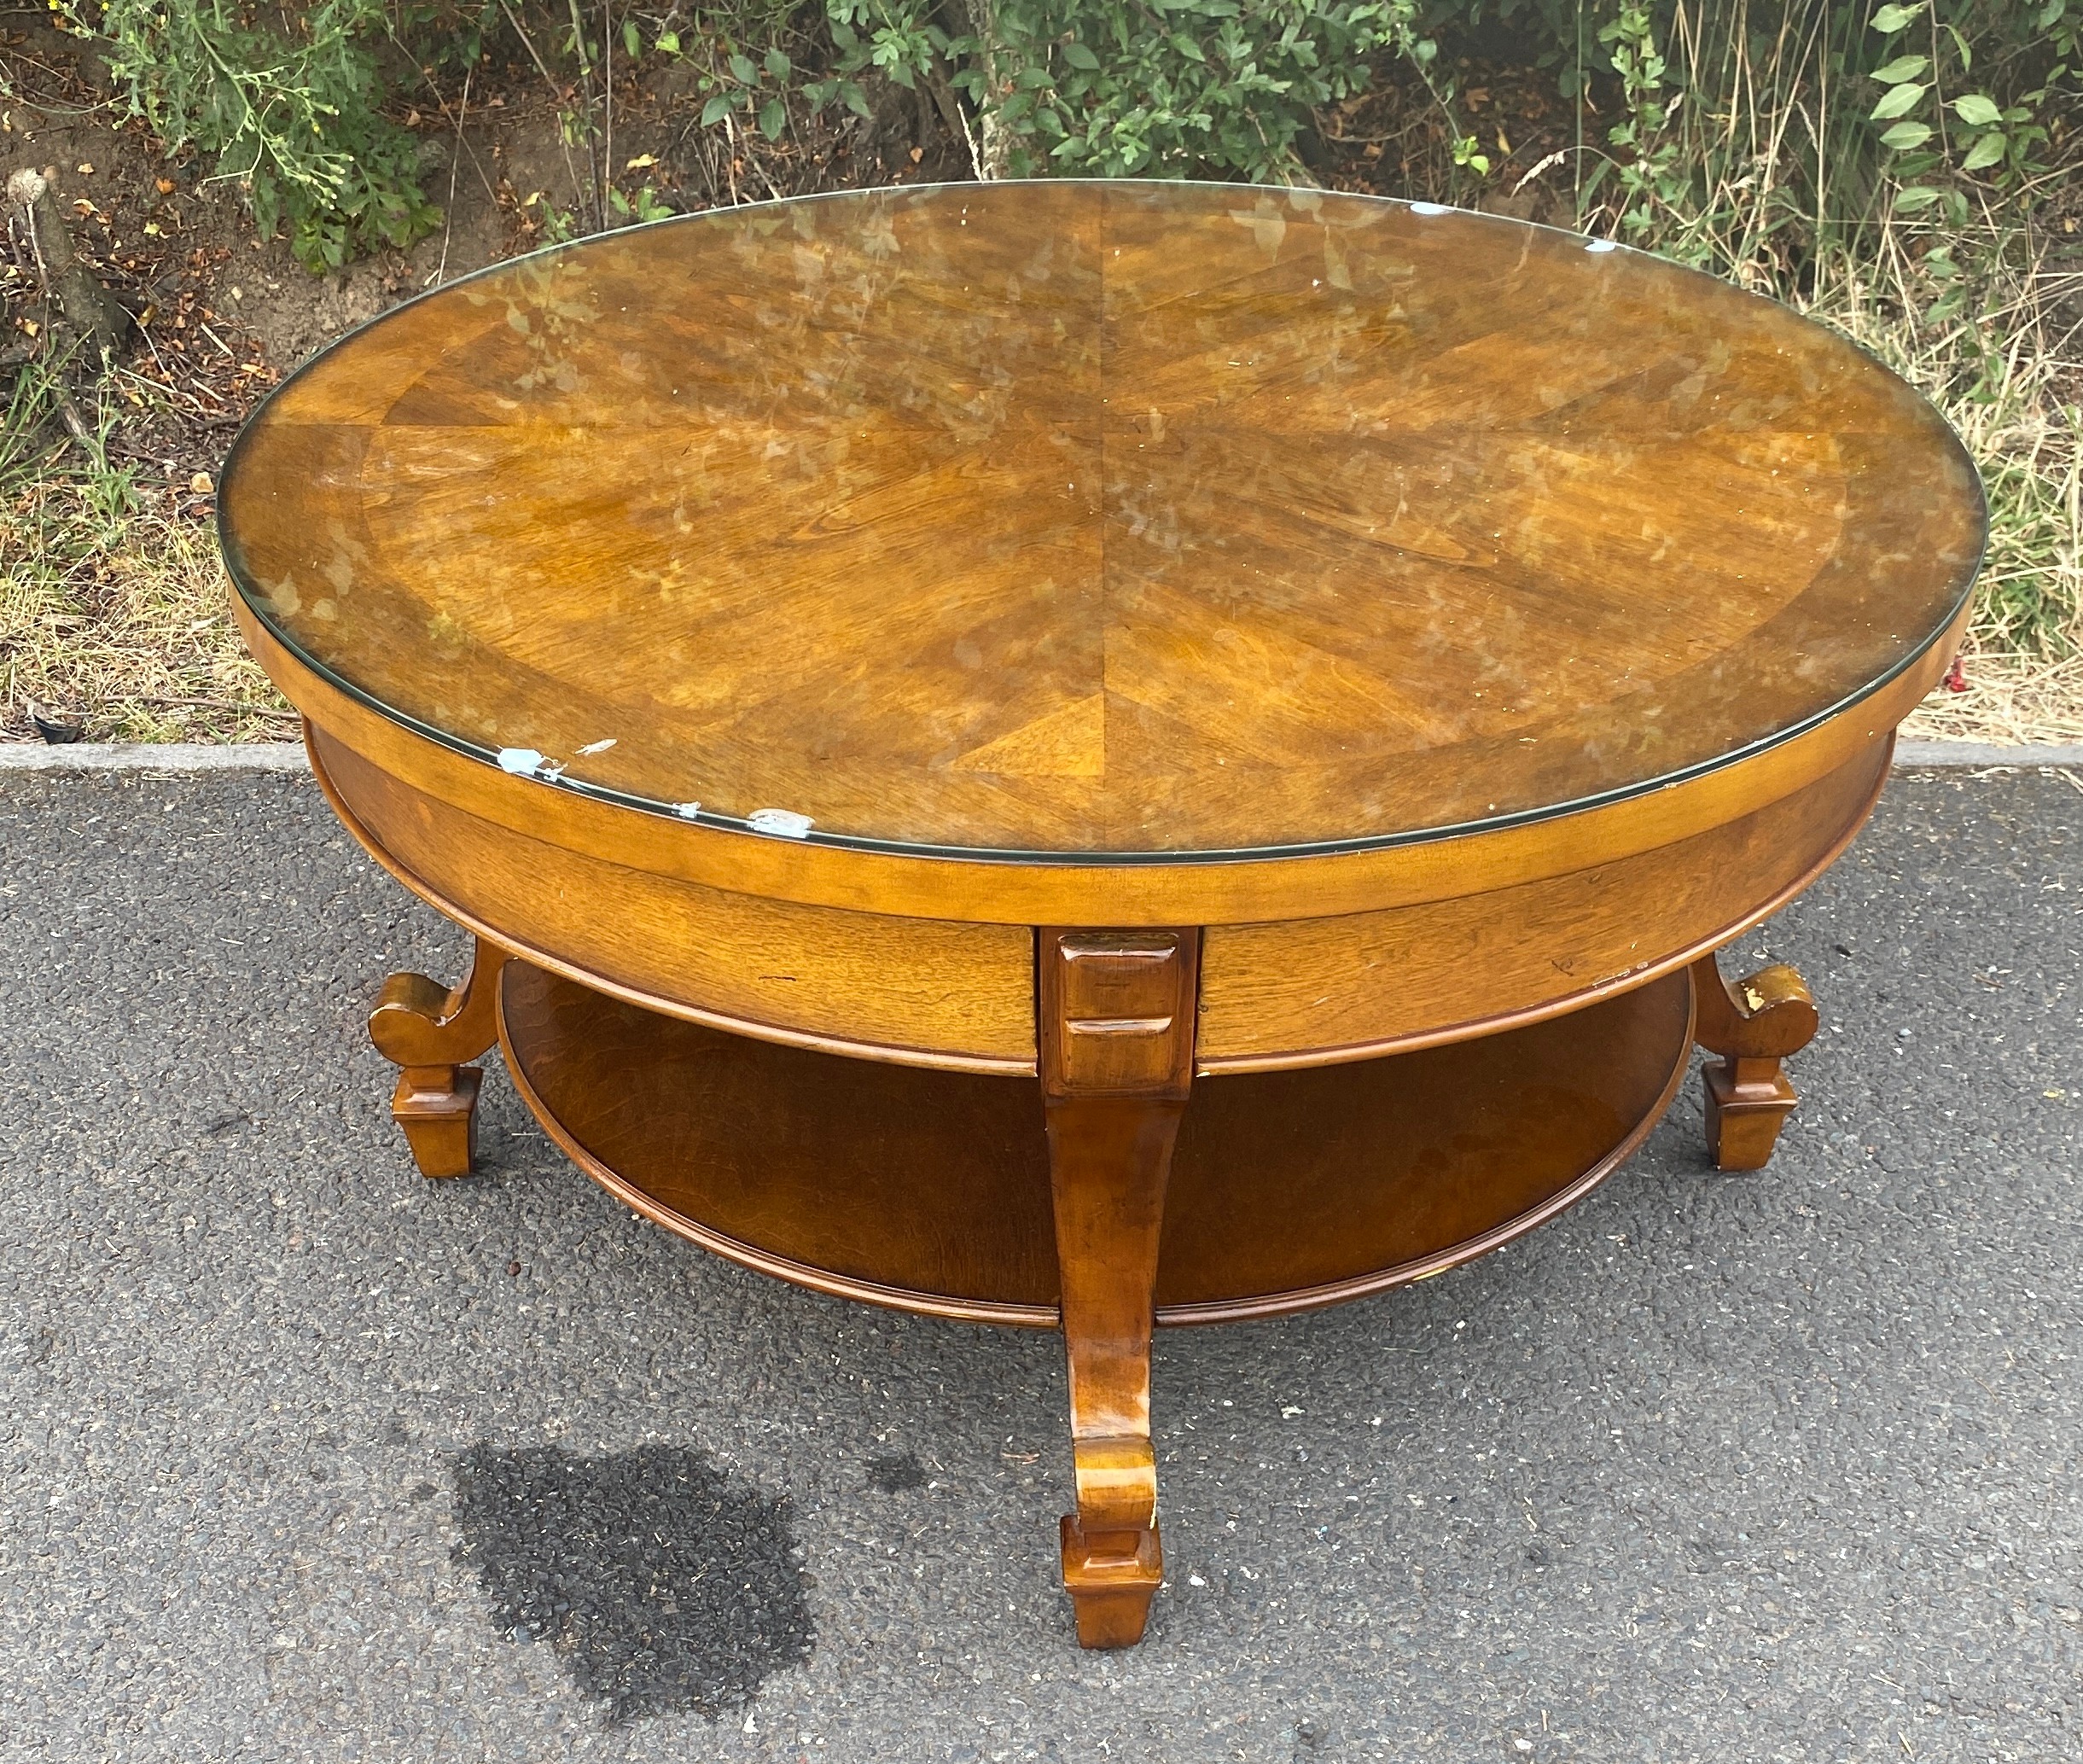 Circular wooden coffee table with glass cover, diameter 36 inches, Height 19 inches - Image 3 of 4